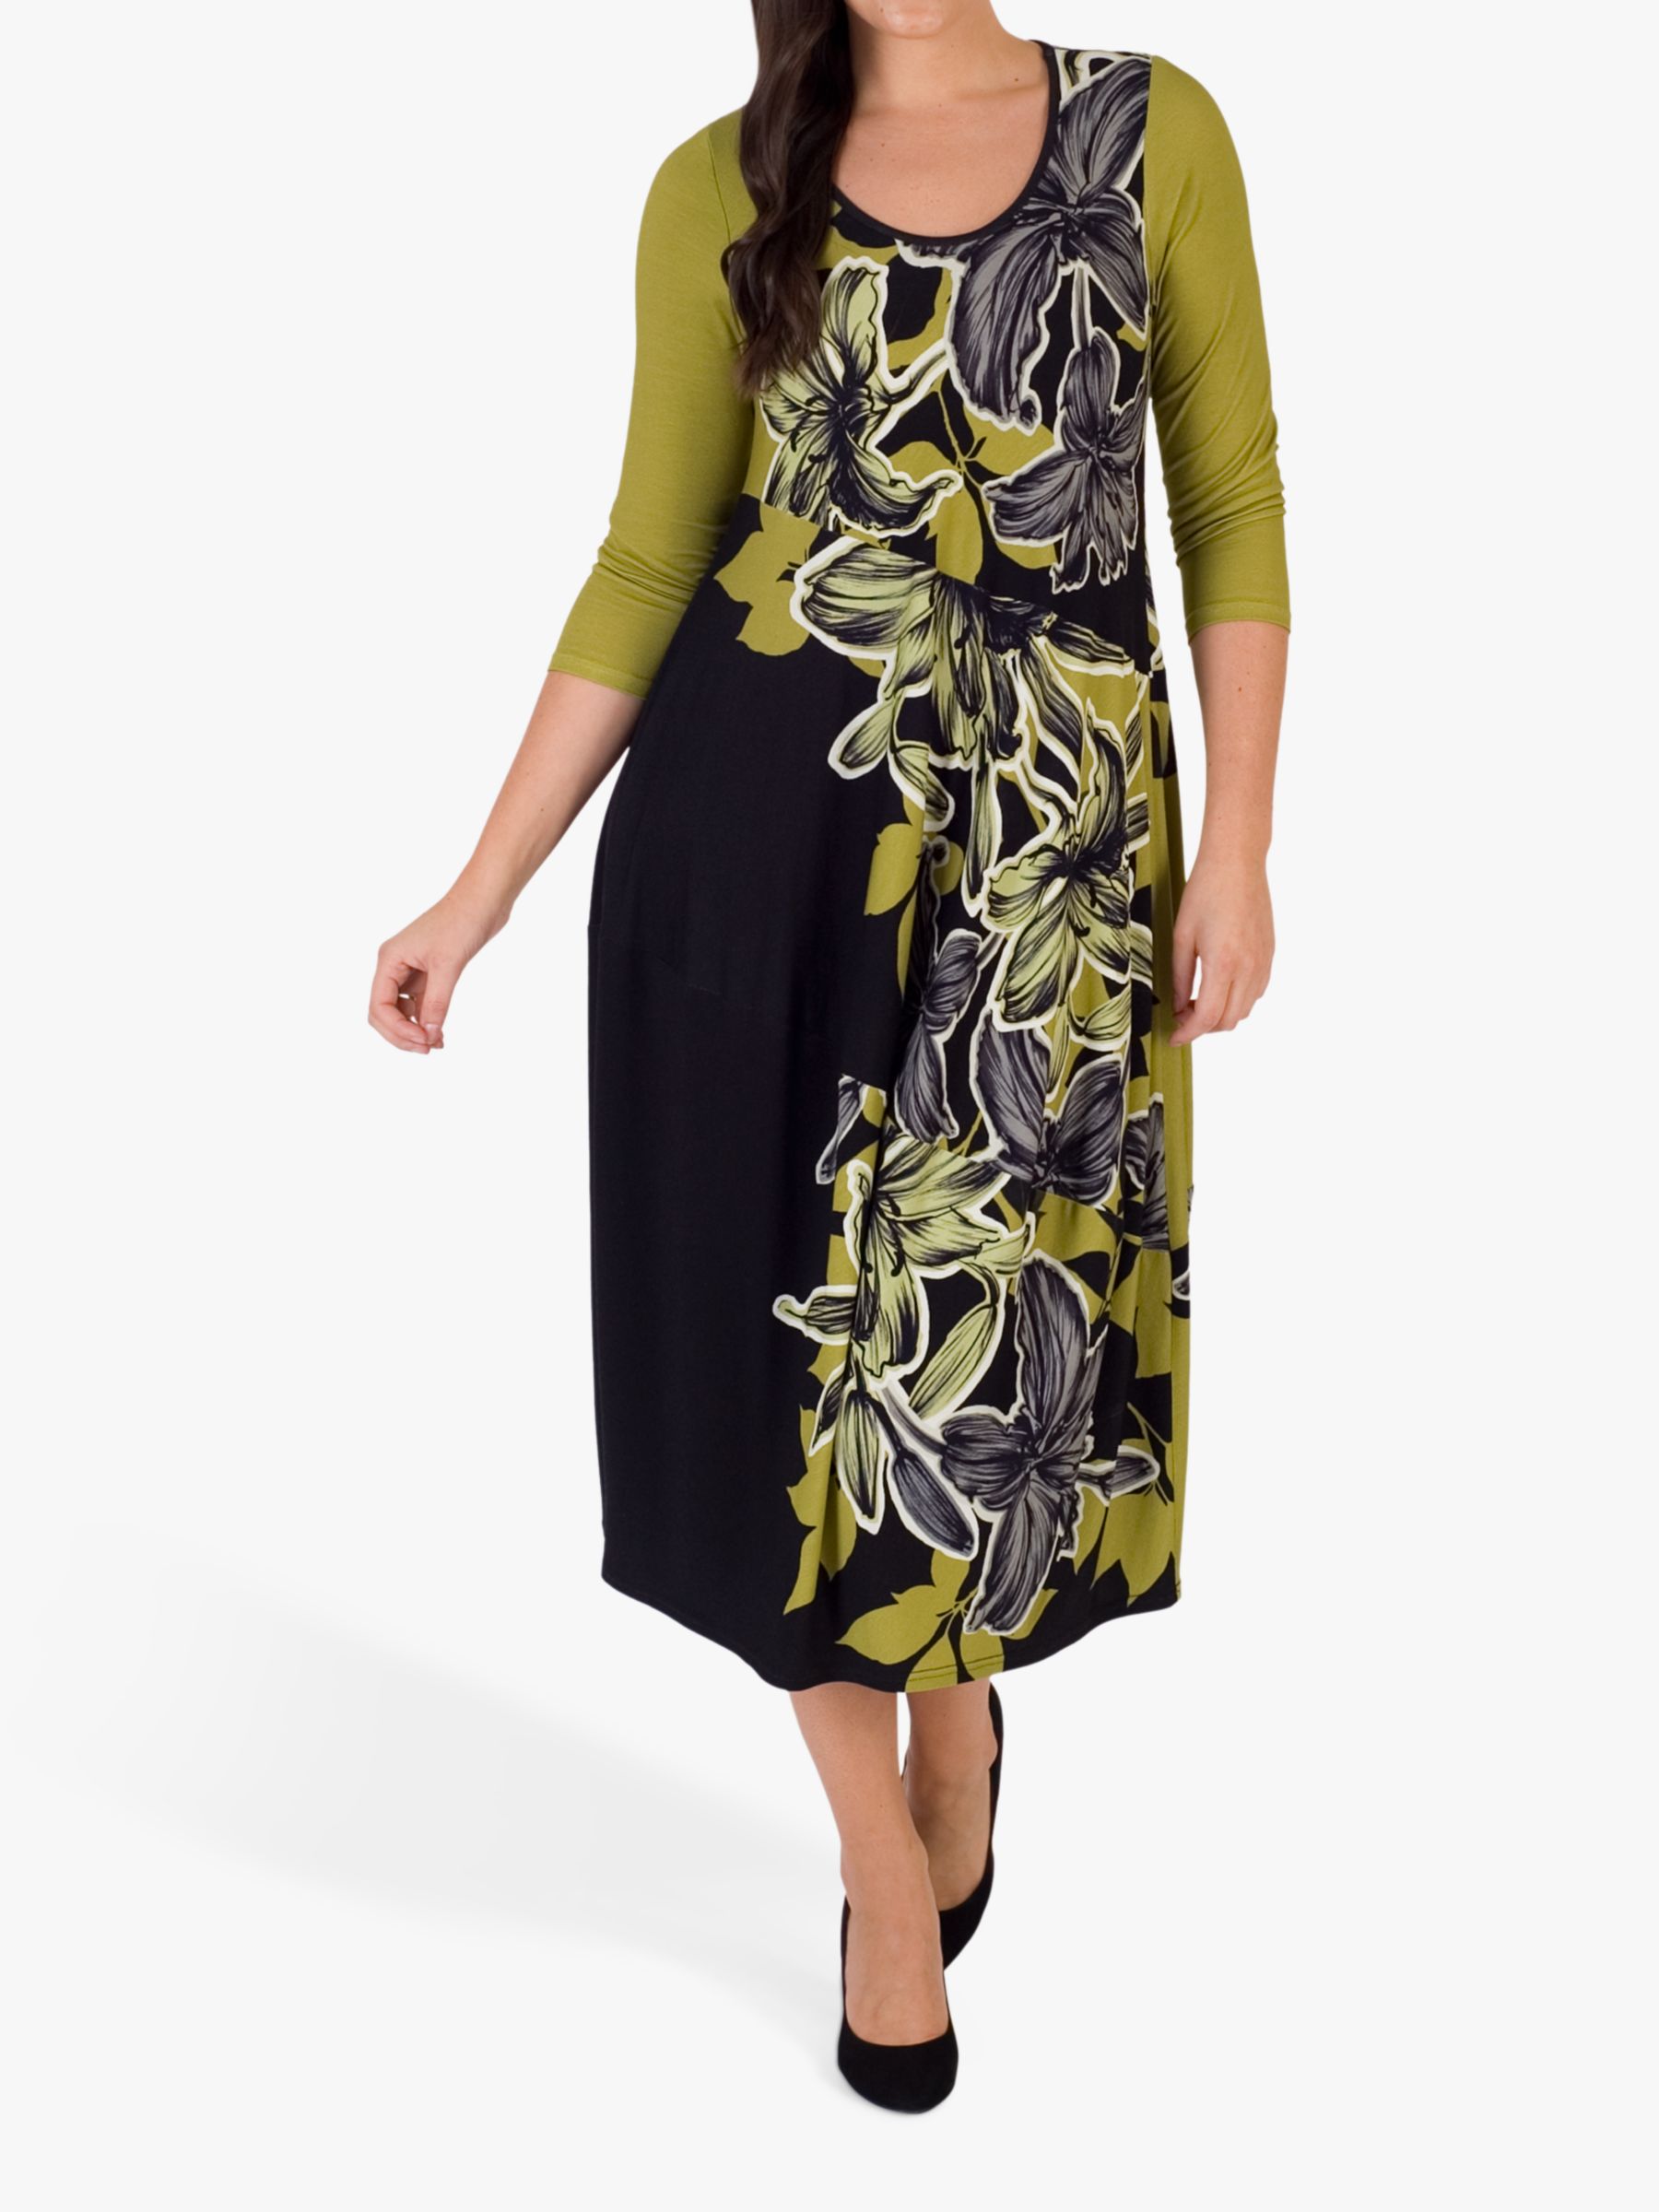 chesca Floral Draped Dress, Black/Lime